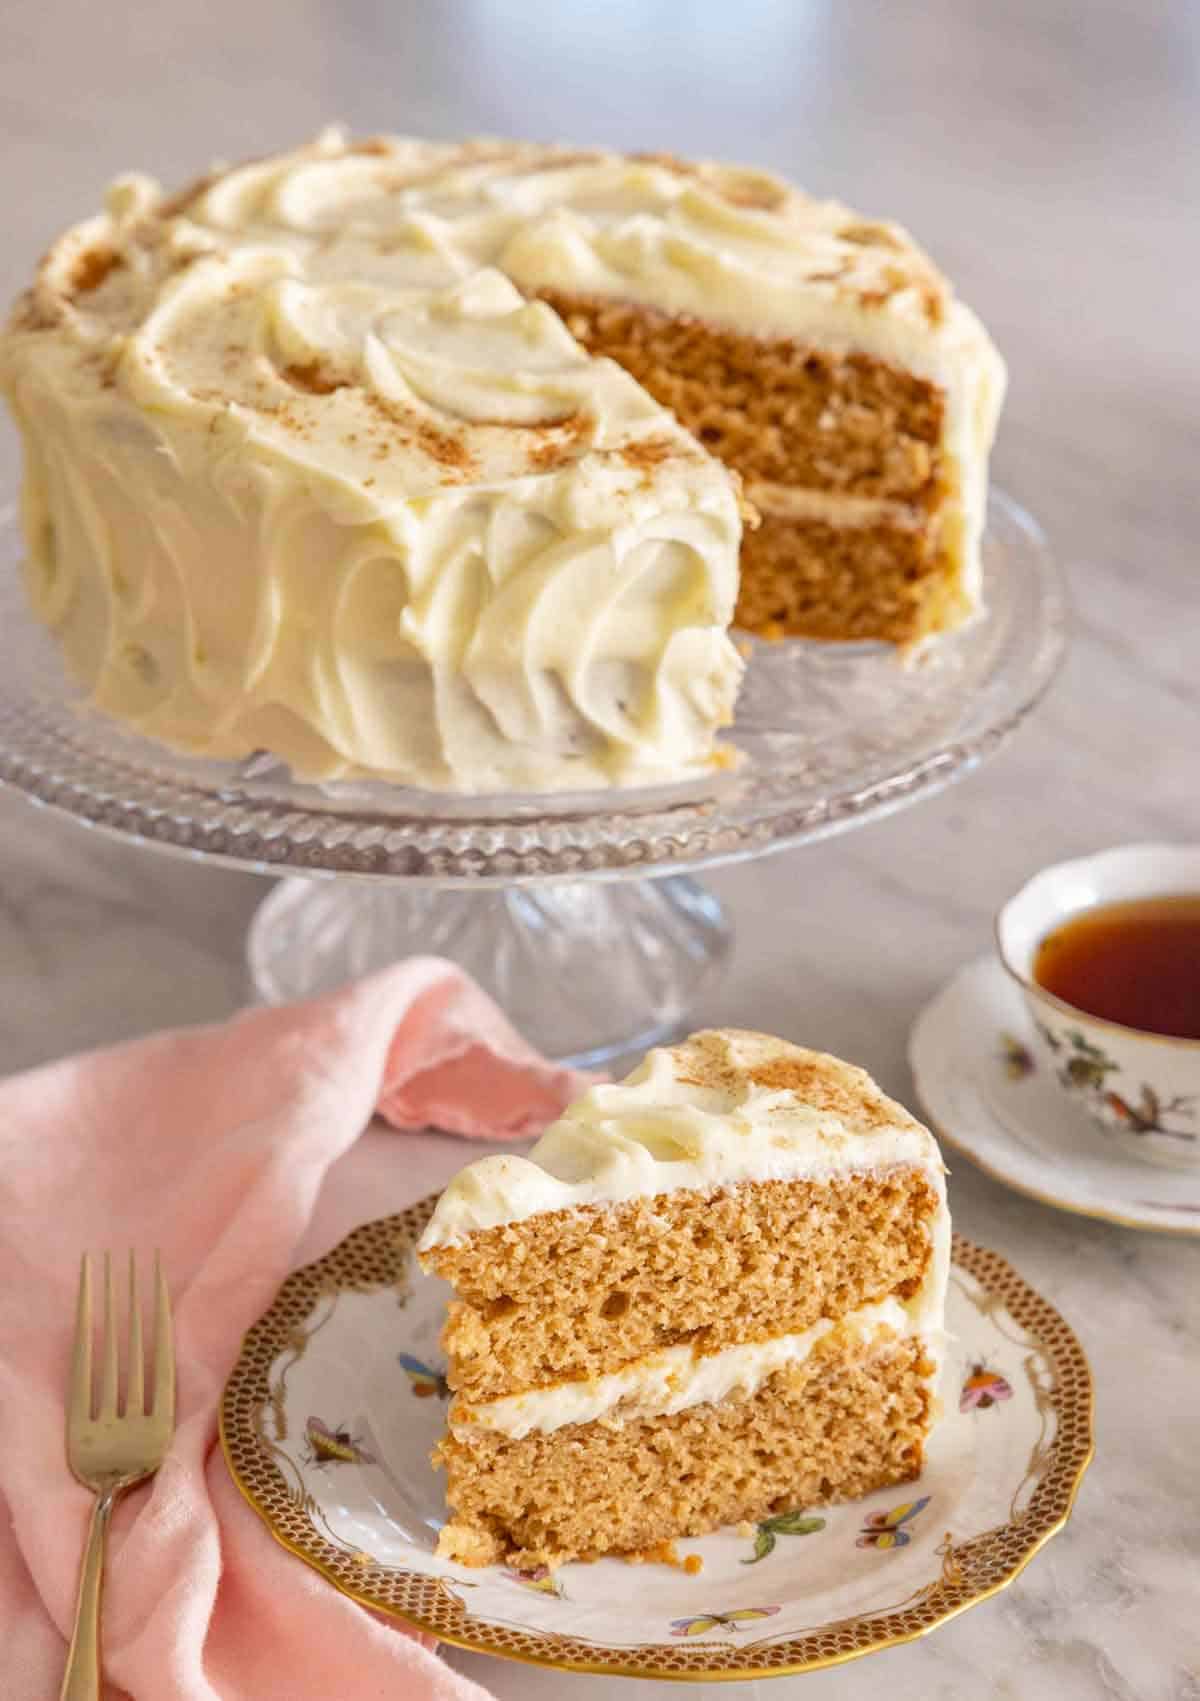 A slice of spice cake on a plate in front of the cut cake on a cake stand.